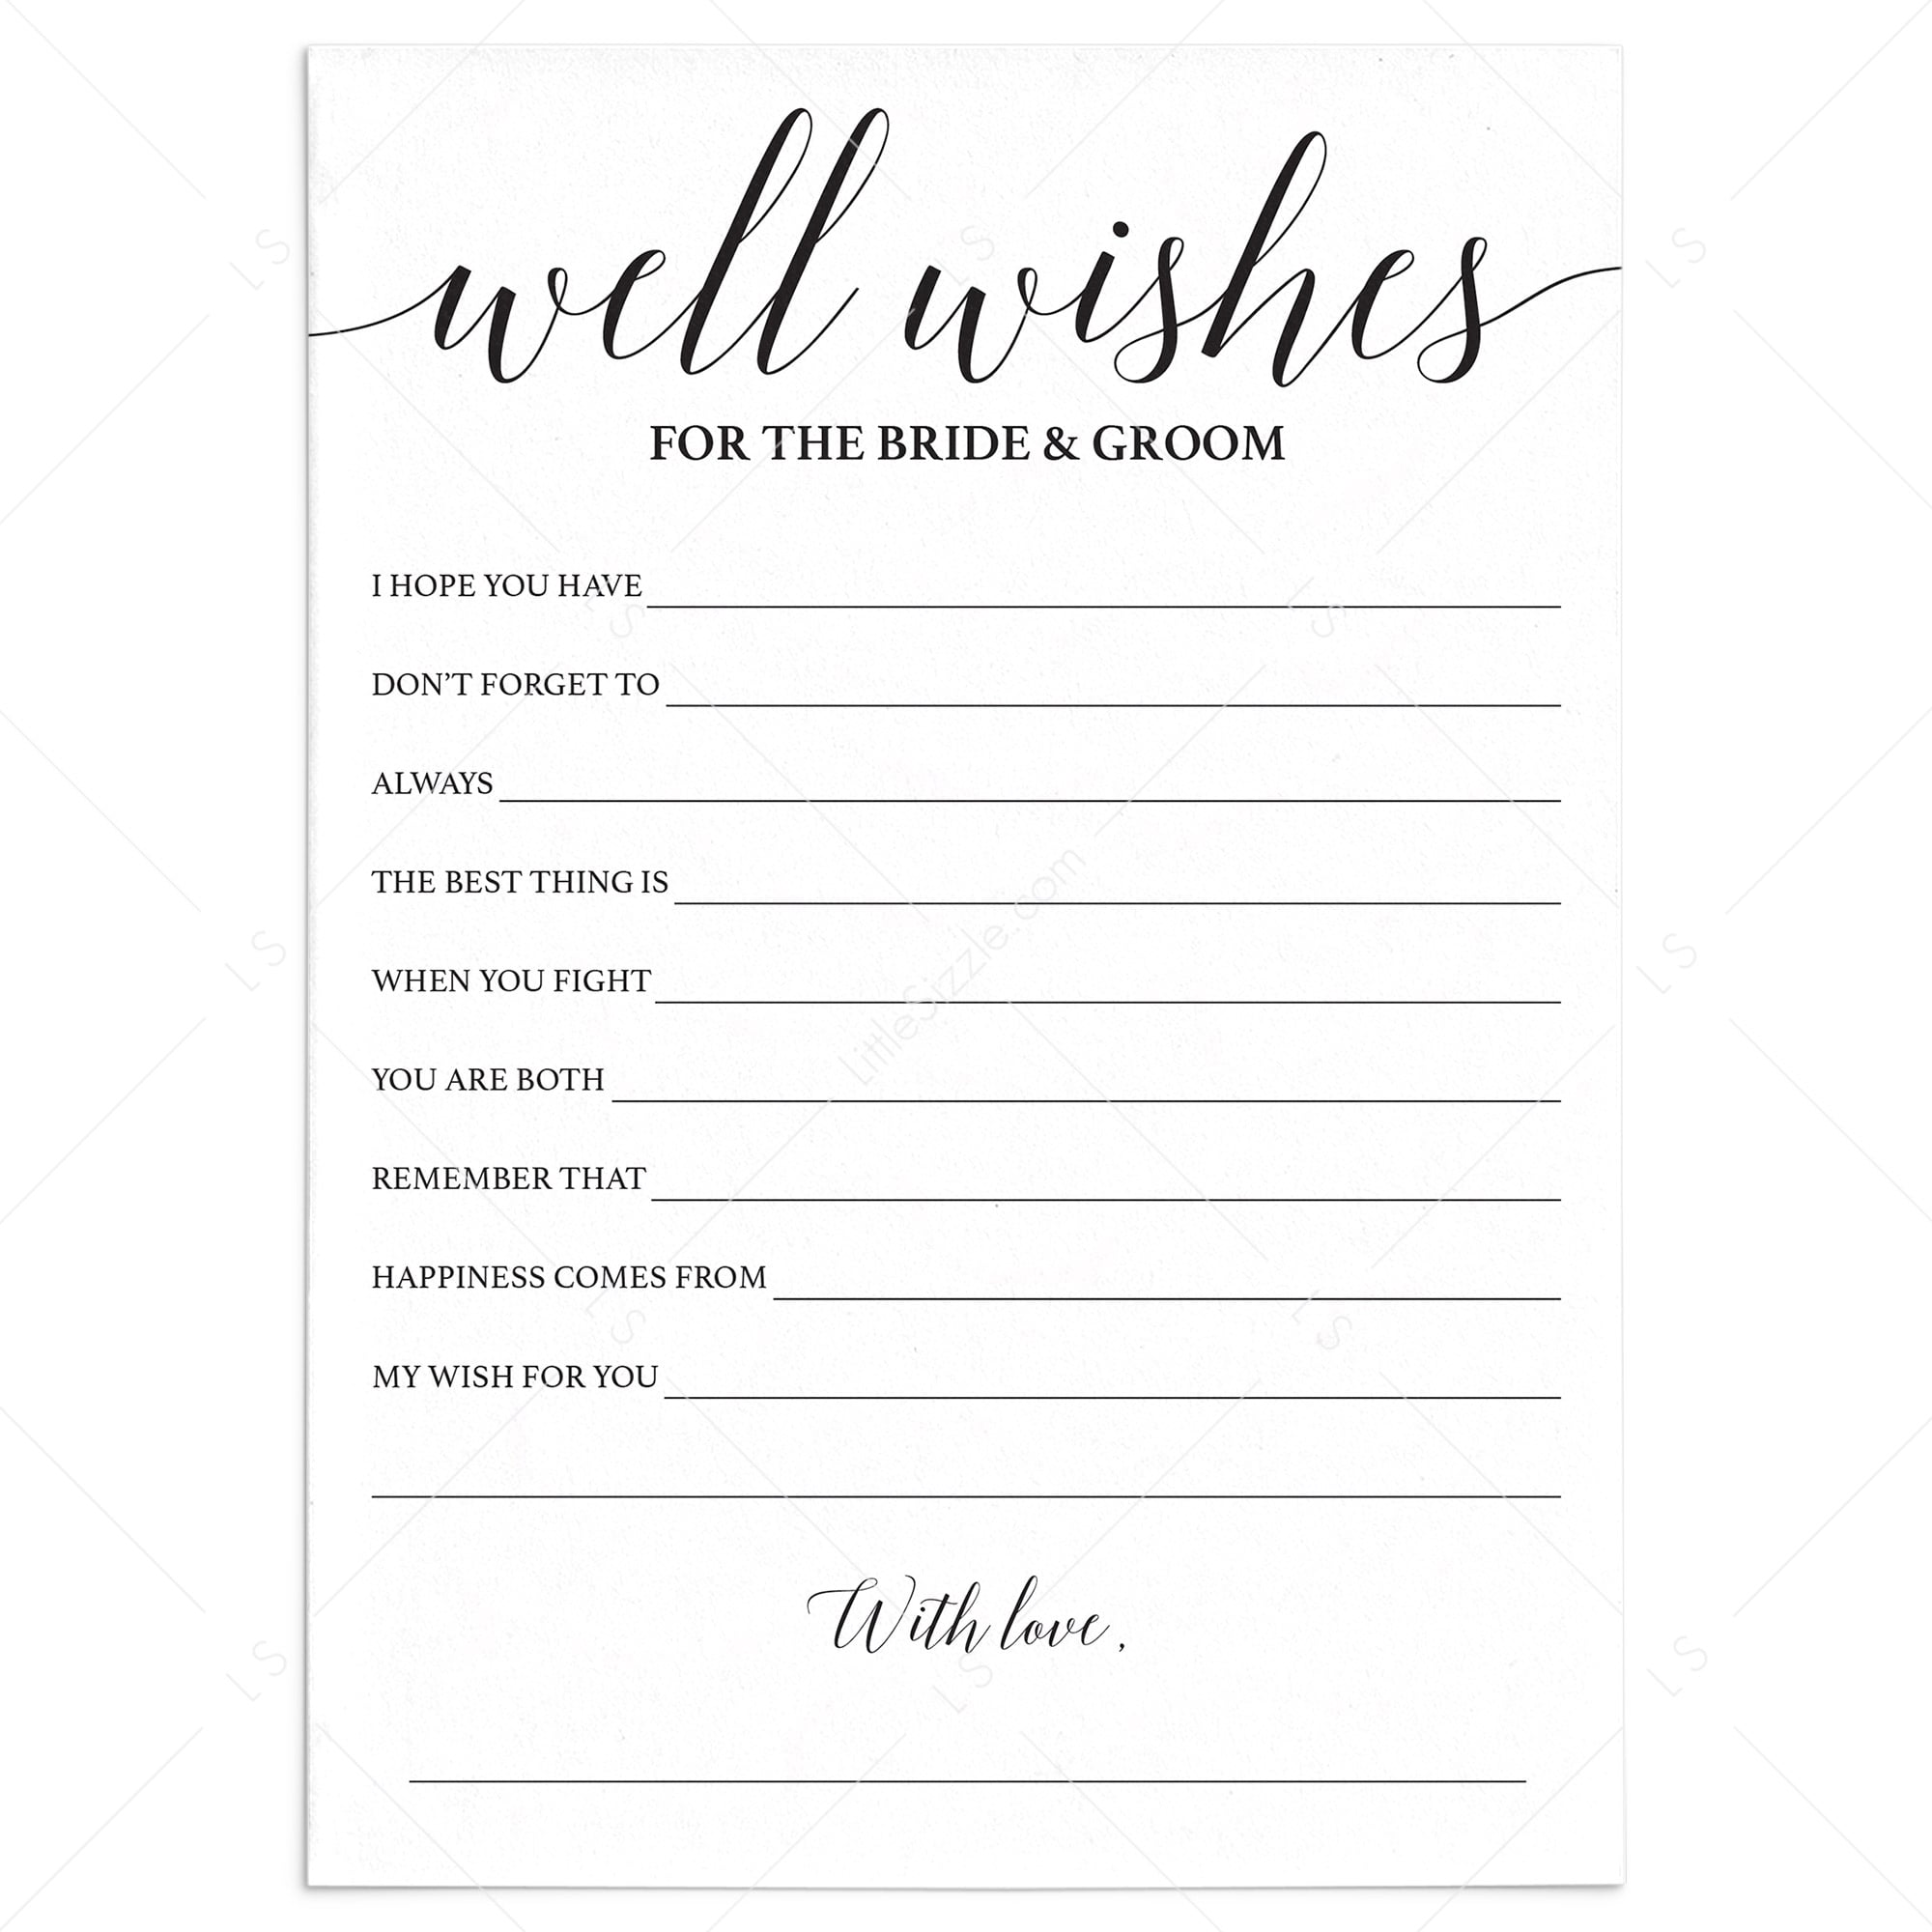 Calligraphy Wedding Well Wishes Card Printable by LittleSizzle